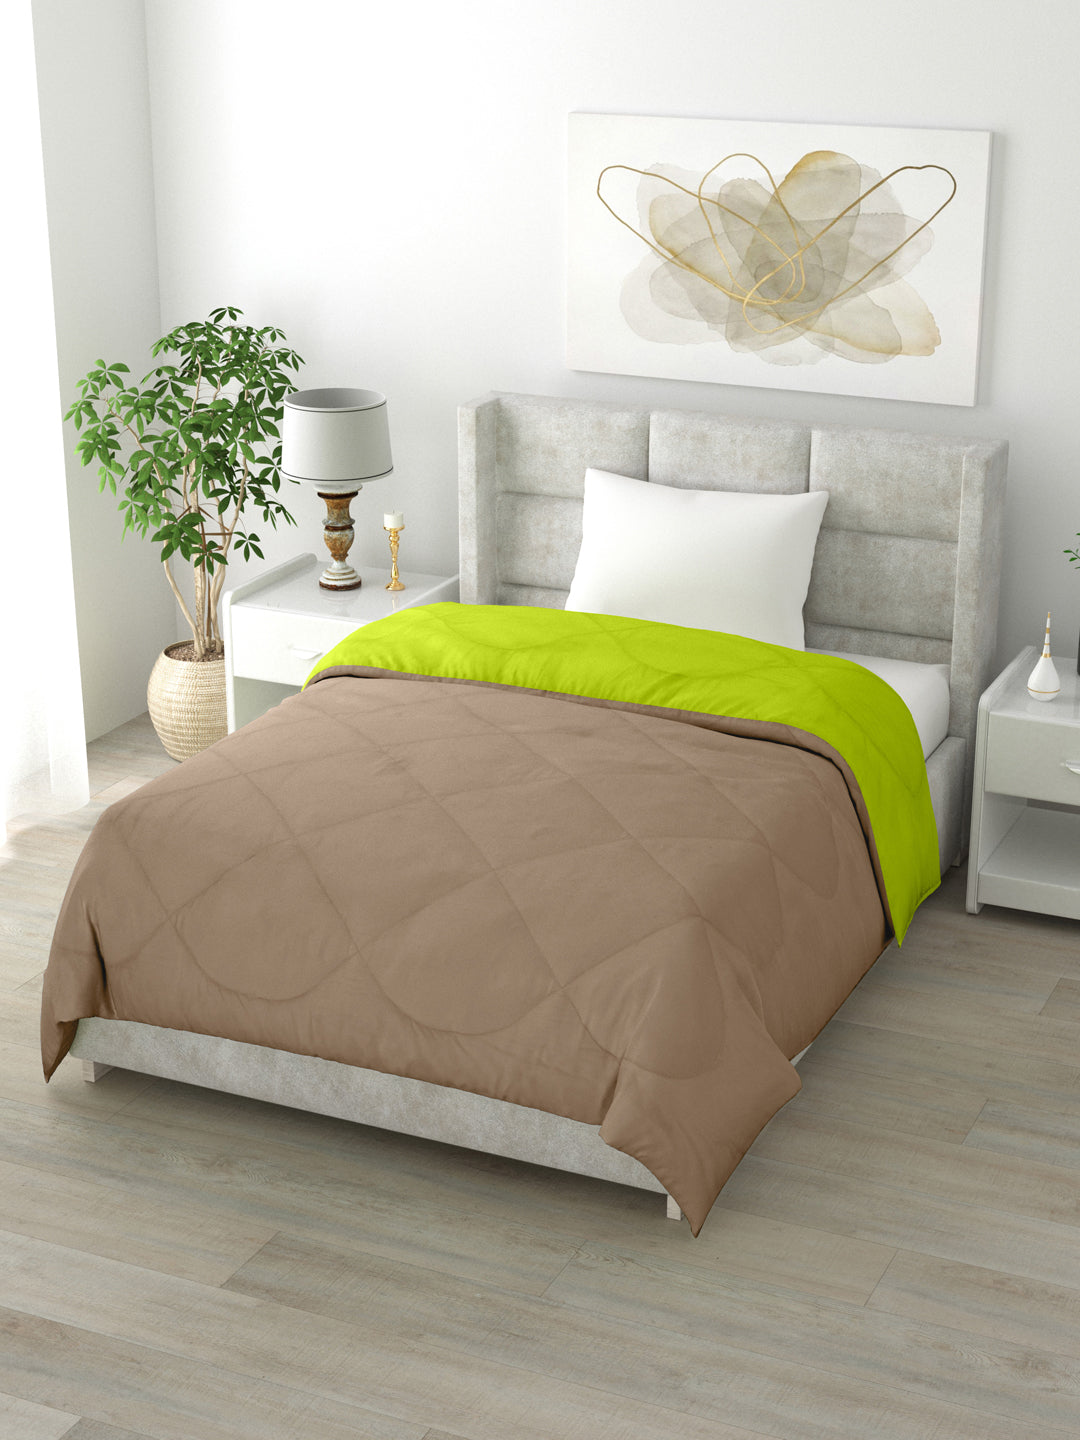 Reversible Single Bed Comforter 200 GSM 60x90 Inches (Taupe & Green)